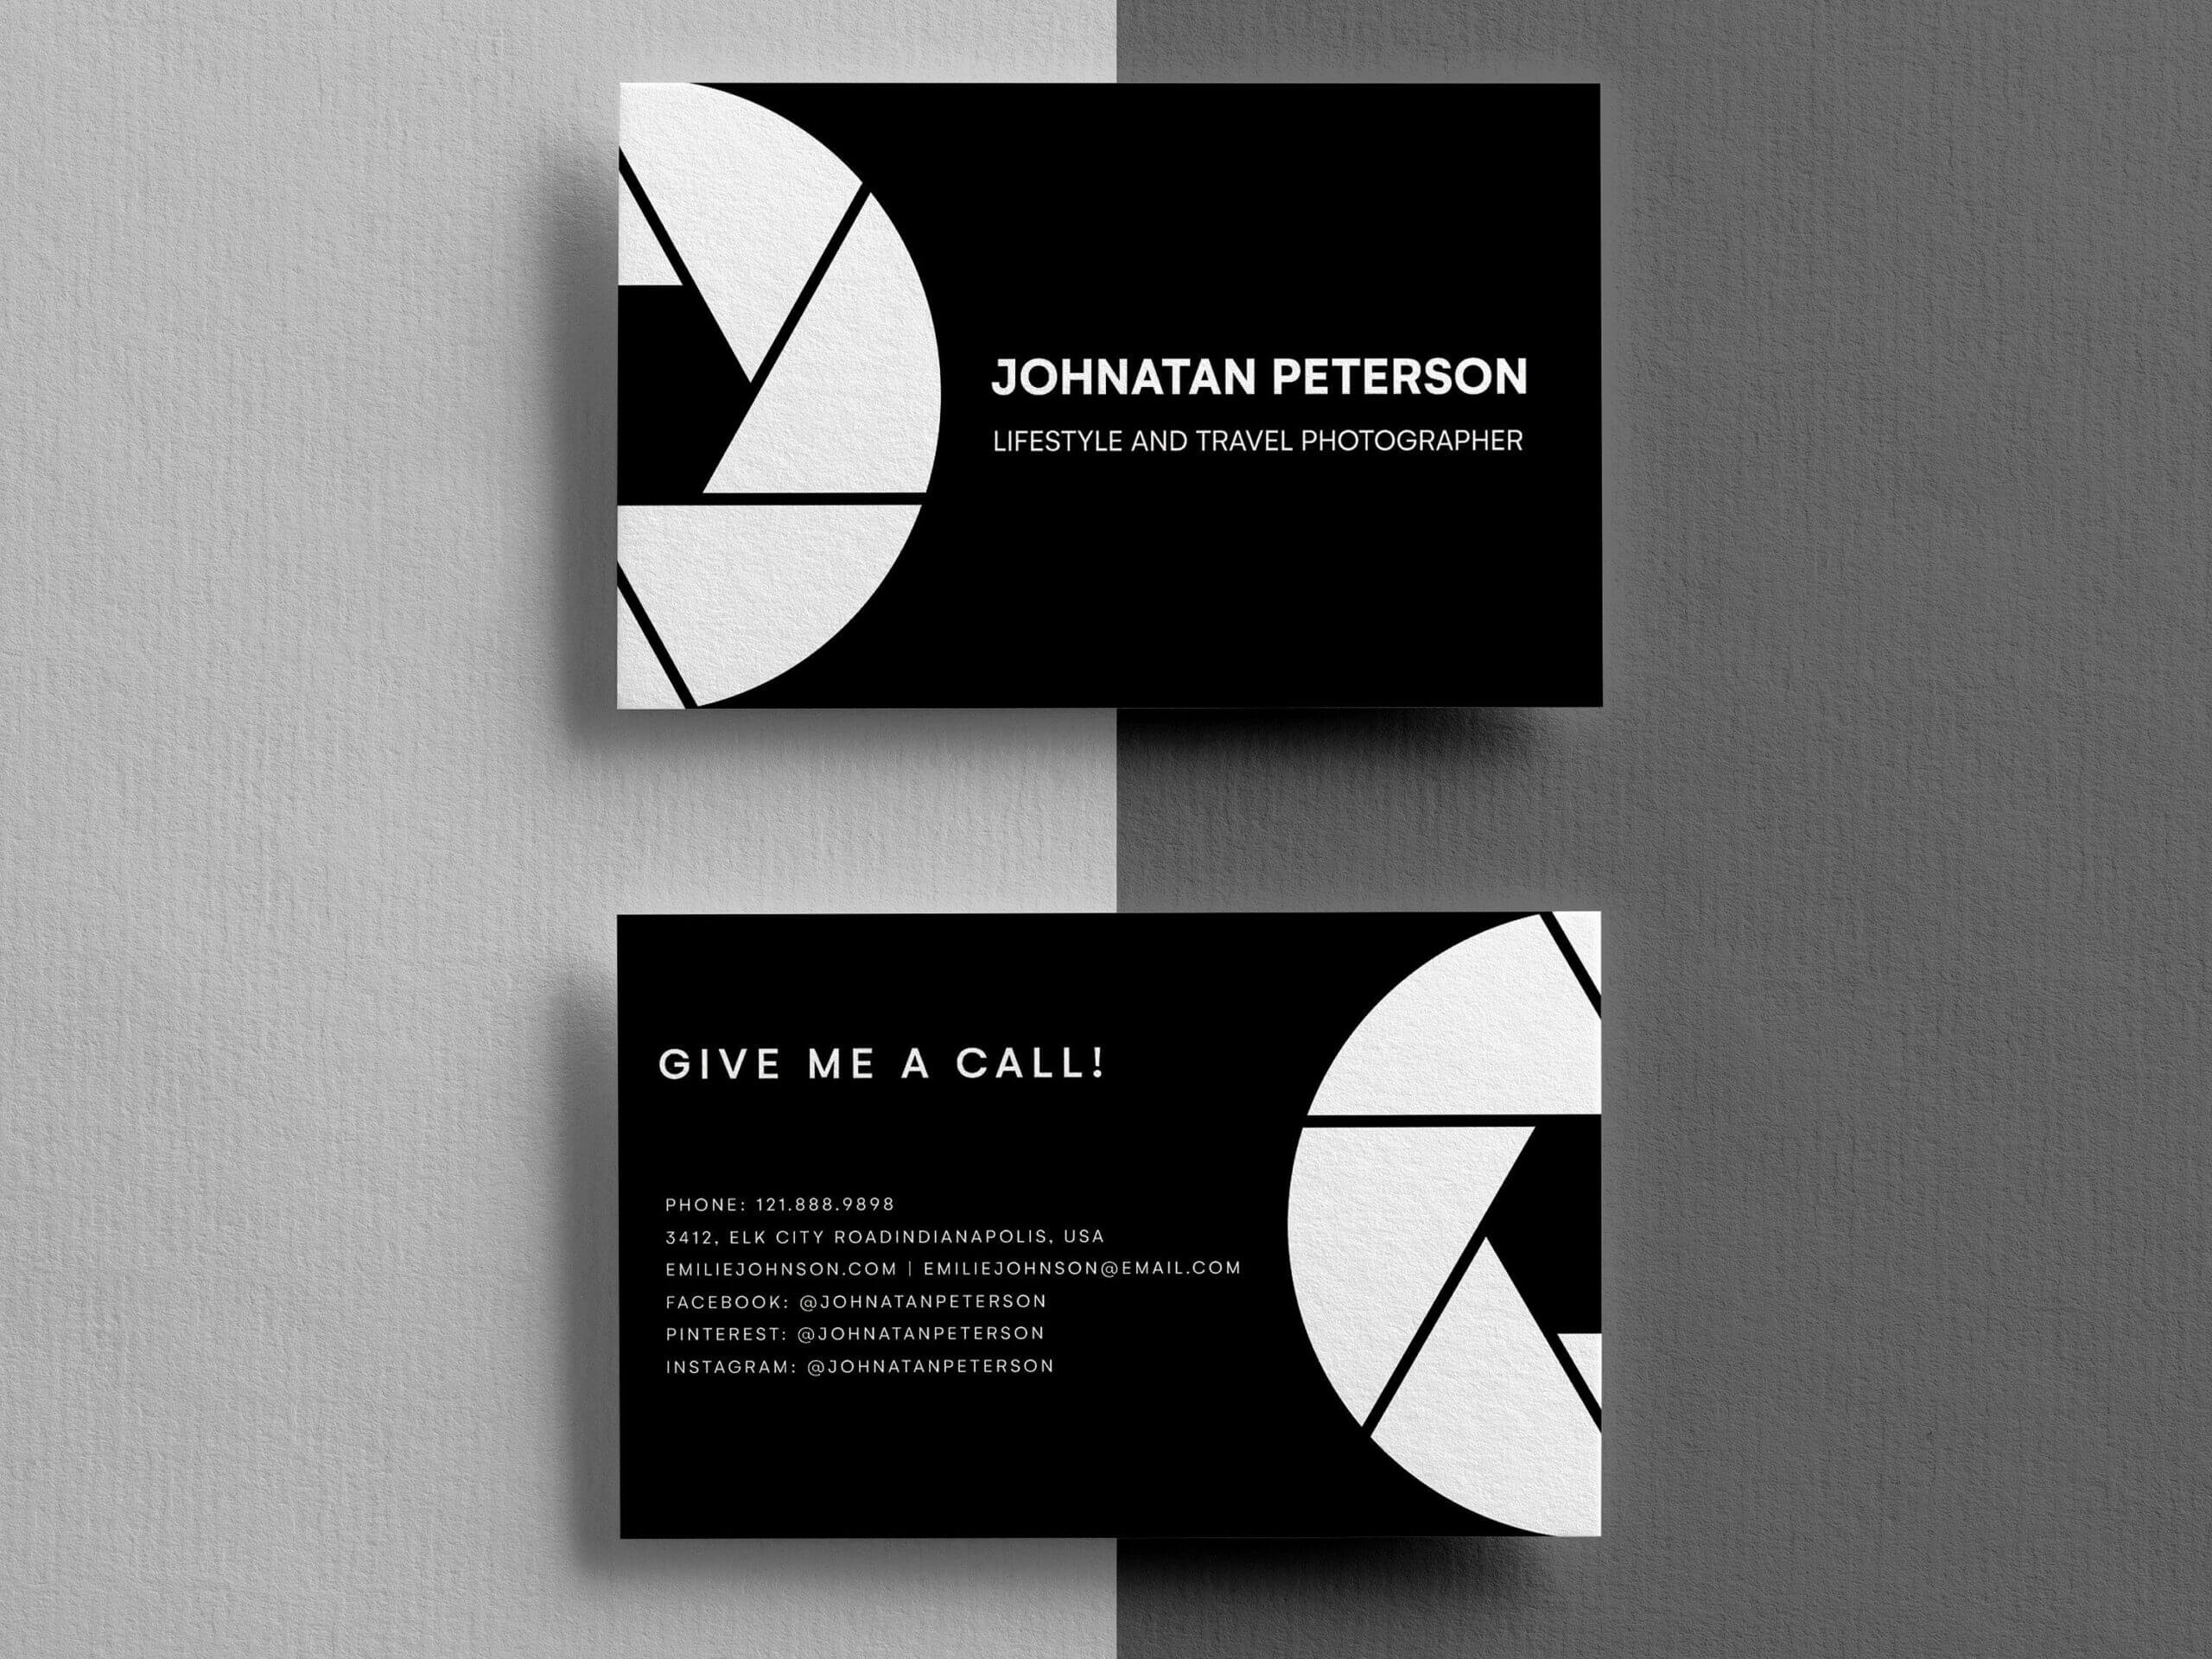 023 Template Ideas Photography Business Wondrous Card Throughout Call Card Templates